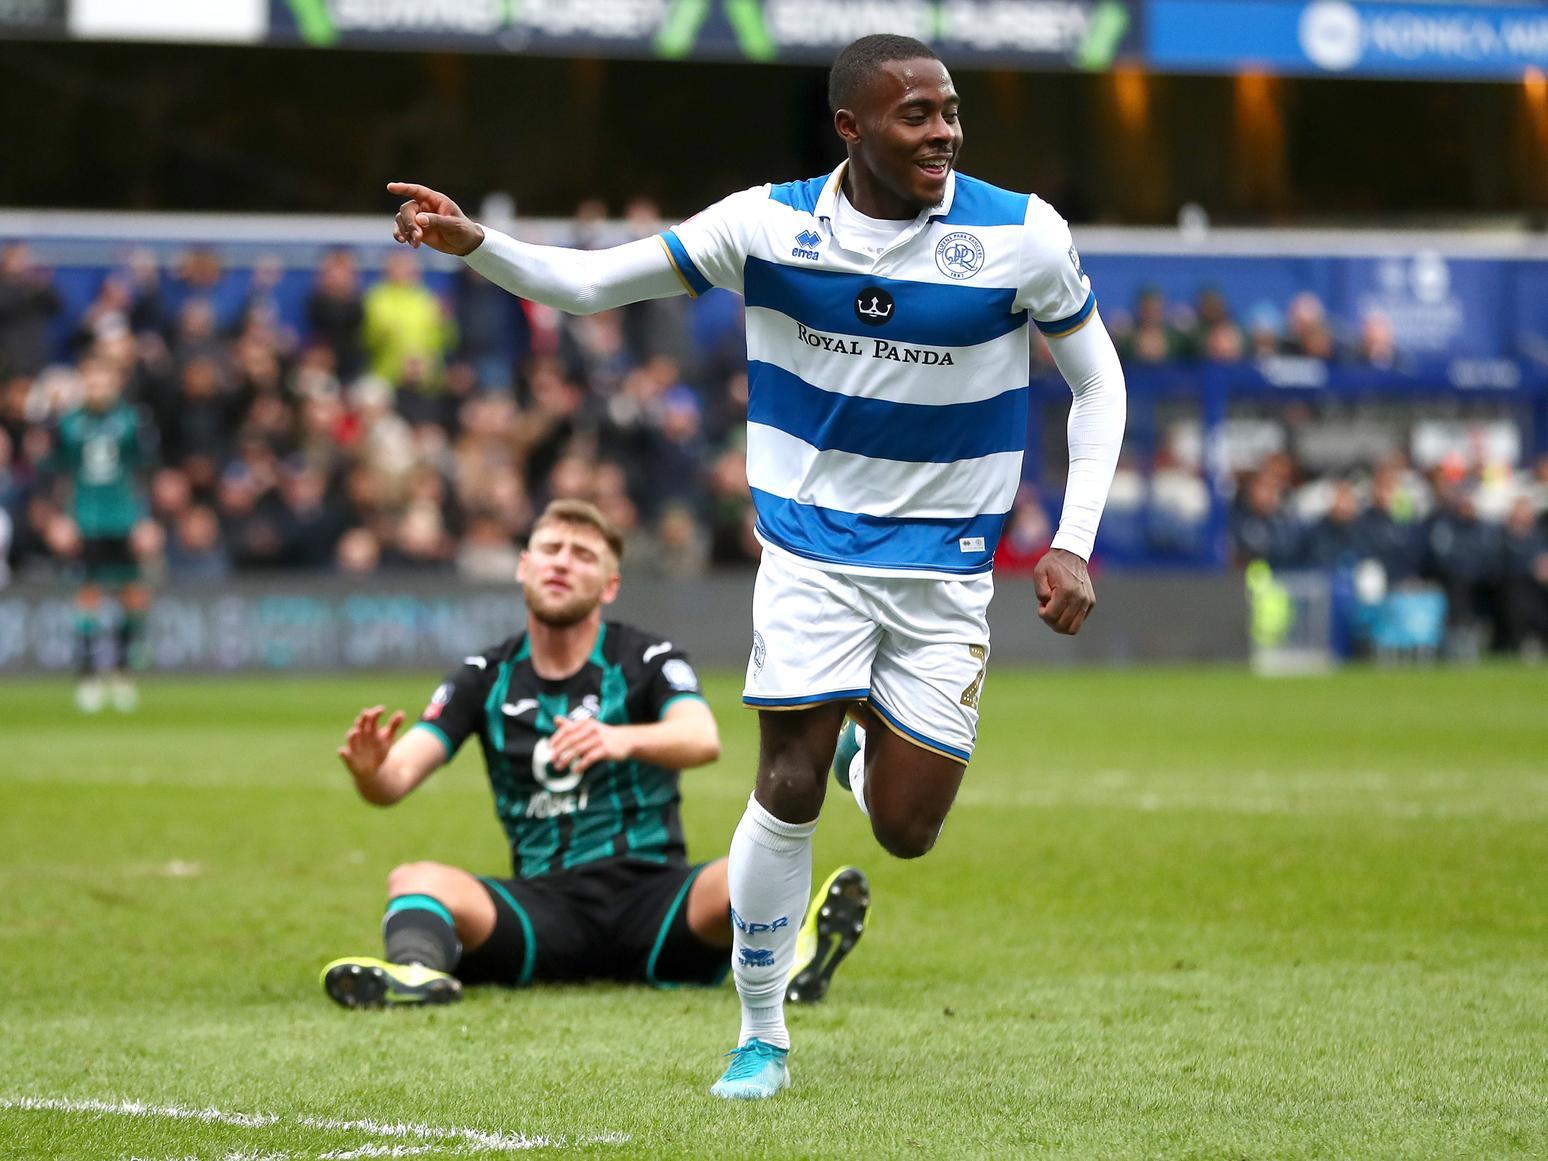 Southampton are believed to be leading the race to sign Queens Park Rangers starlet Bright Osayi-Samuel, who has scored four goals and made four assists so far this season. (Football Insider)